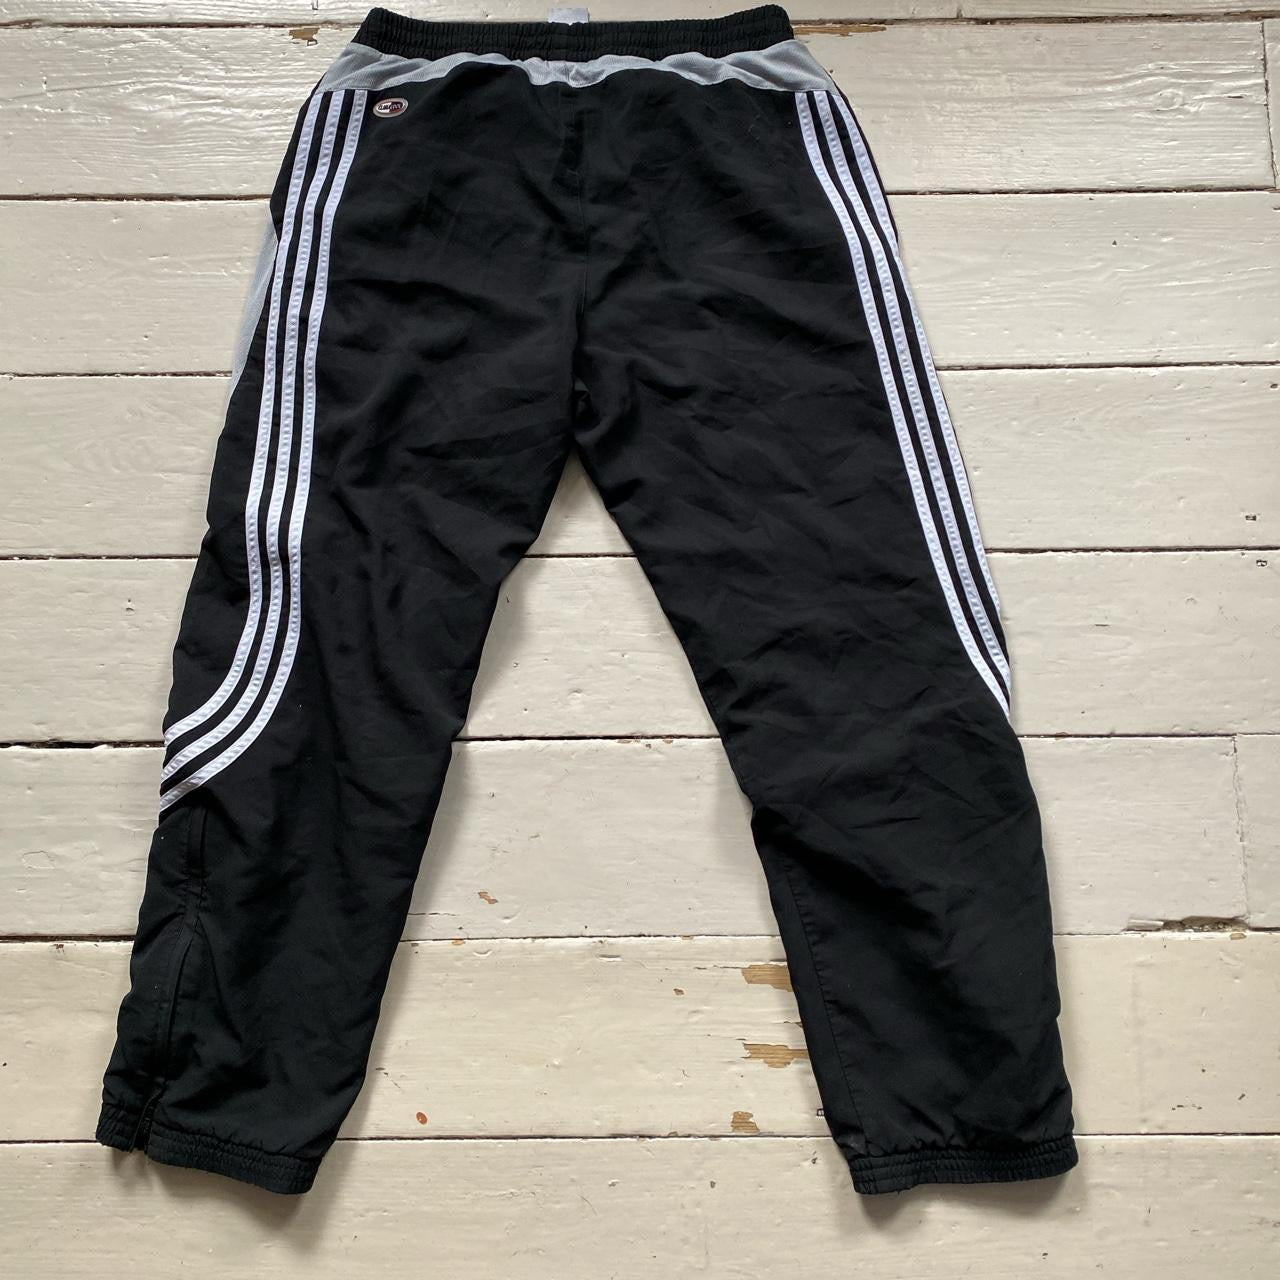 Adidas Black and White Shell Bottoms (32/30)